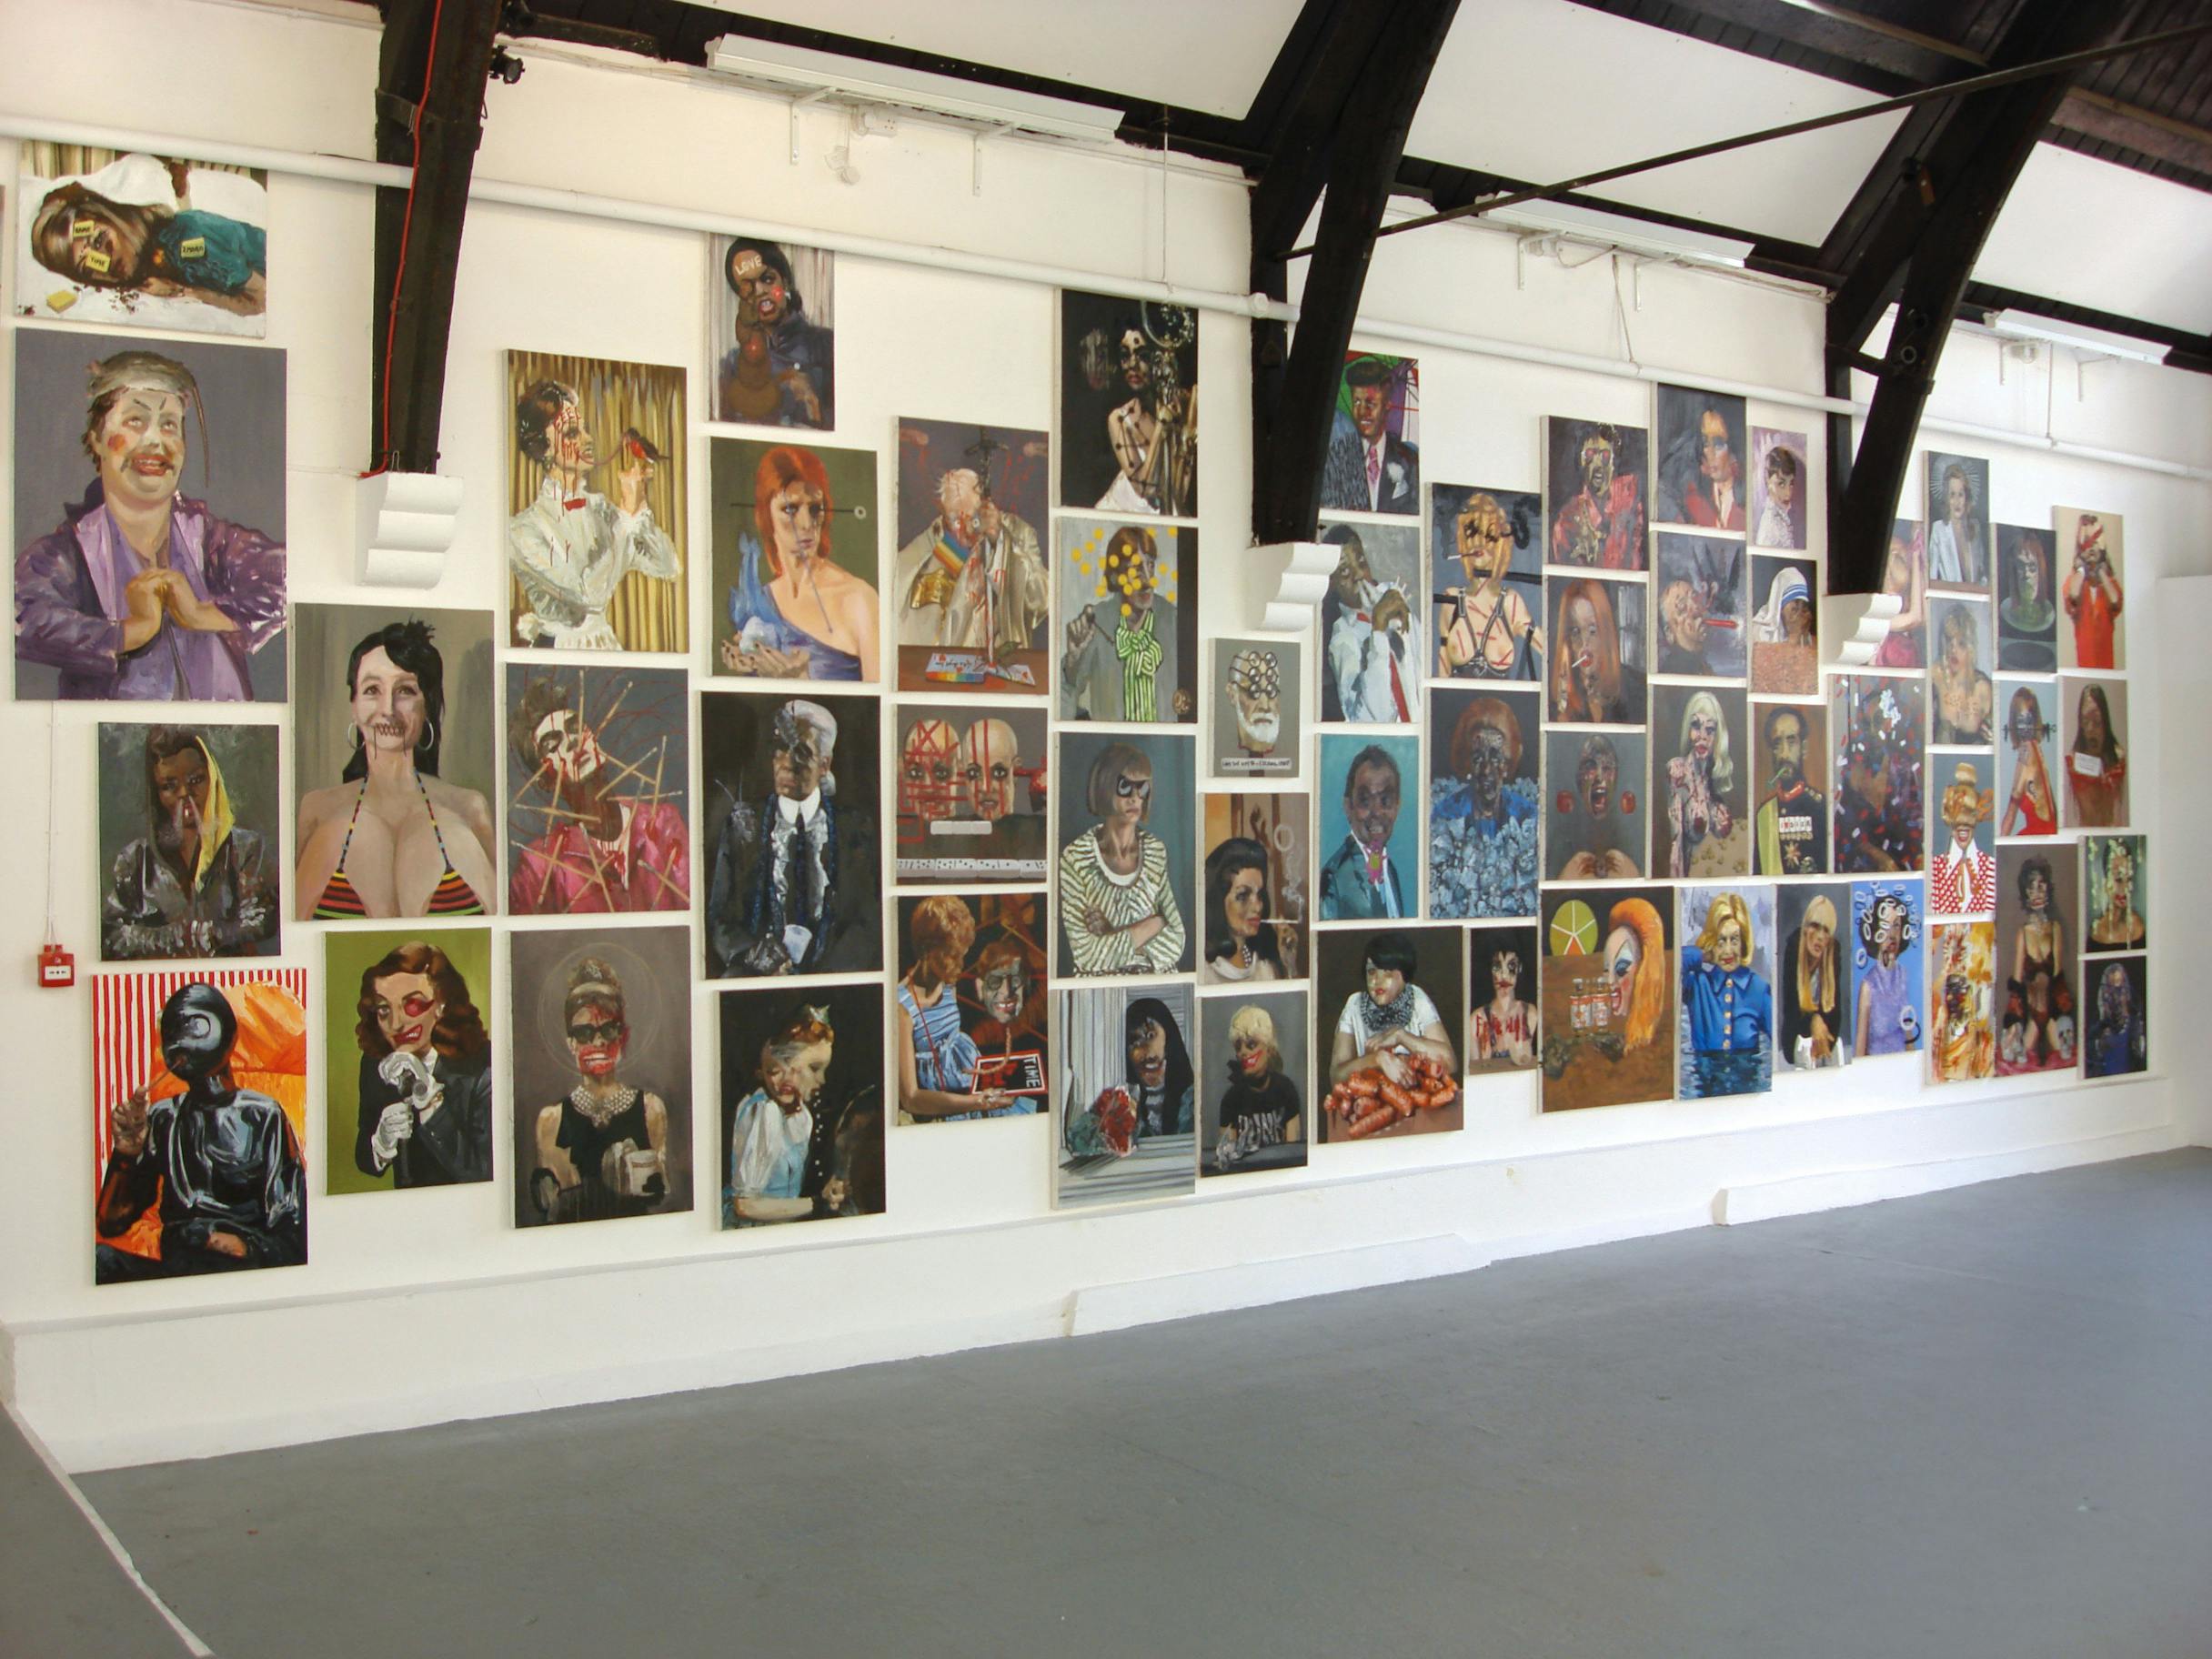 White gallery wall covered in satirical painted portraits, including many pop culture icons.